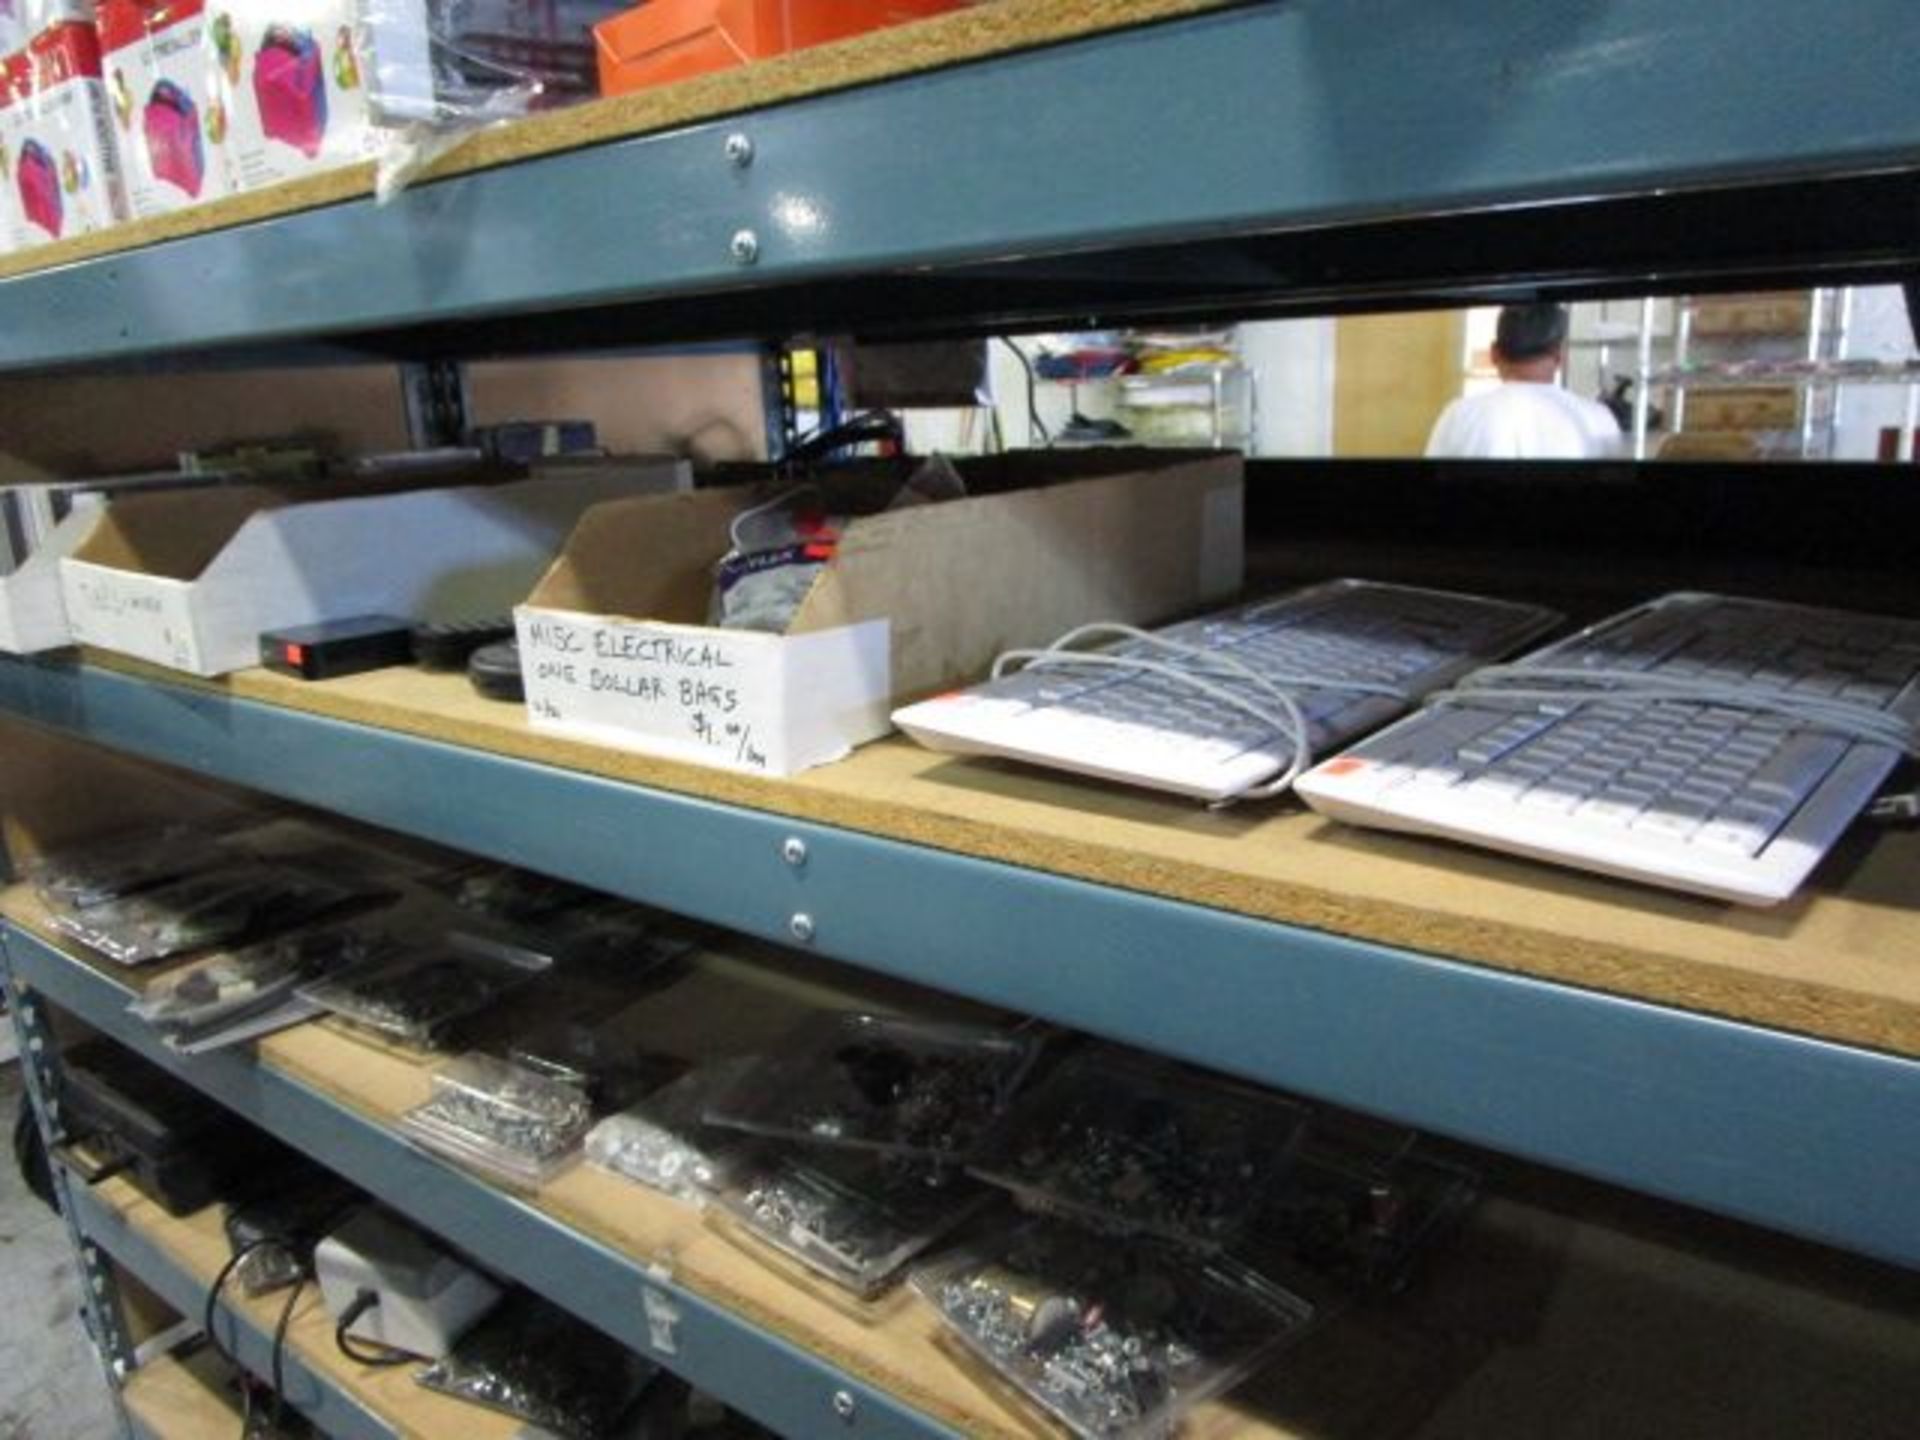 SHELVING UNIT OF ELECTRIC BALLOON PUMP, KEYBOARD, MISC ELECTRONICS - Image 5 of 9